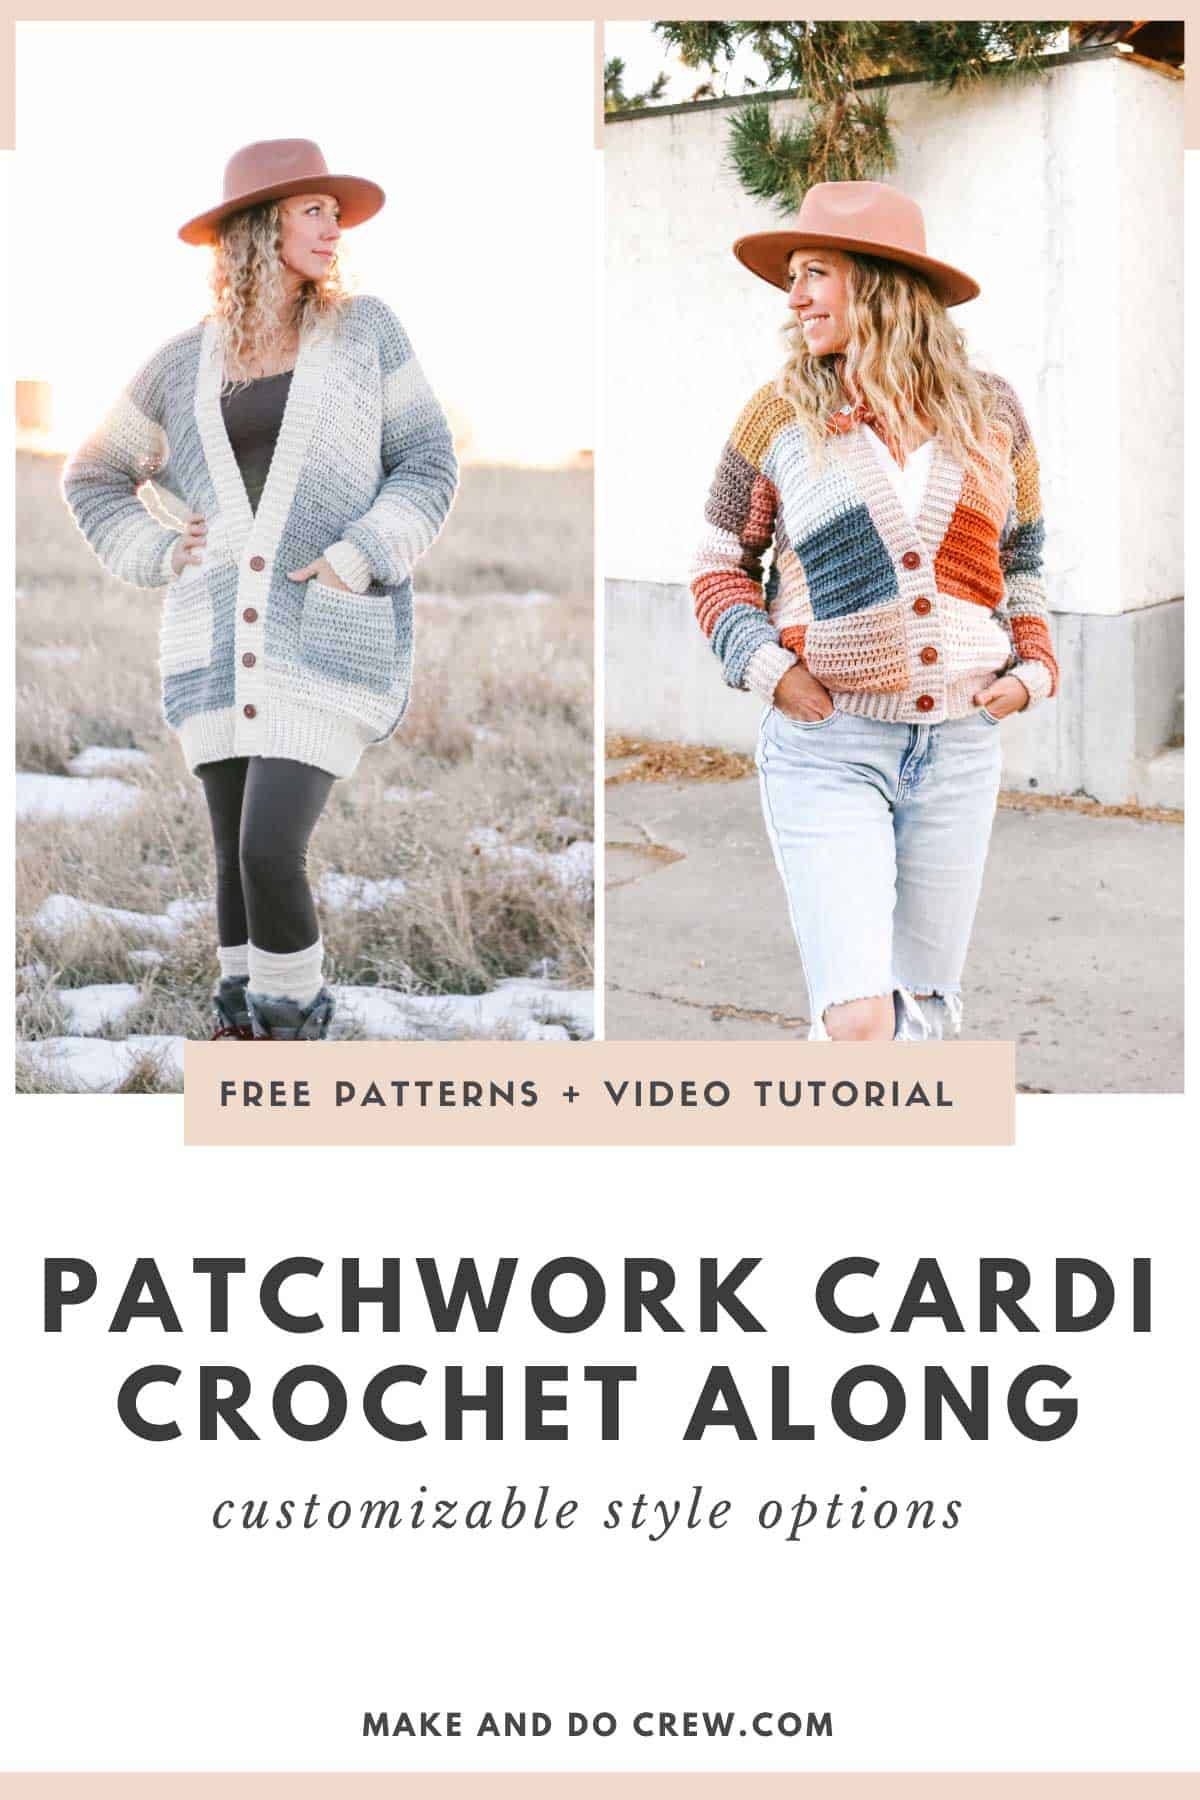 This image has two photos. The first photo shows a blonde woman standing in a snowy field. She is wearing a long, gray and white crochet cardigan, black leggings and snow boots. The other photo shows a blonde woman wearing a colorful patchwork crochet cardigan, light ripped blue jeans and a brown hat. She is standing on a sidewalk in front of a building. 